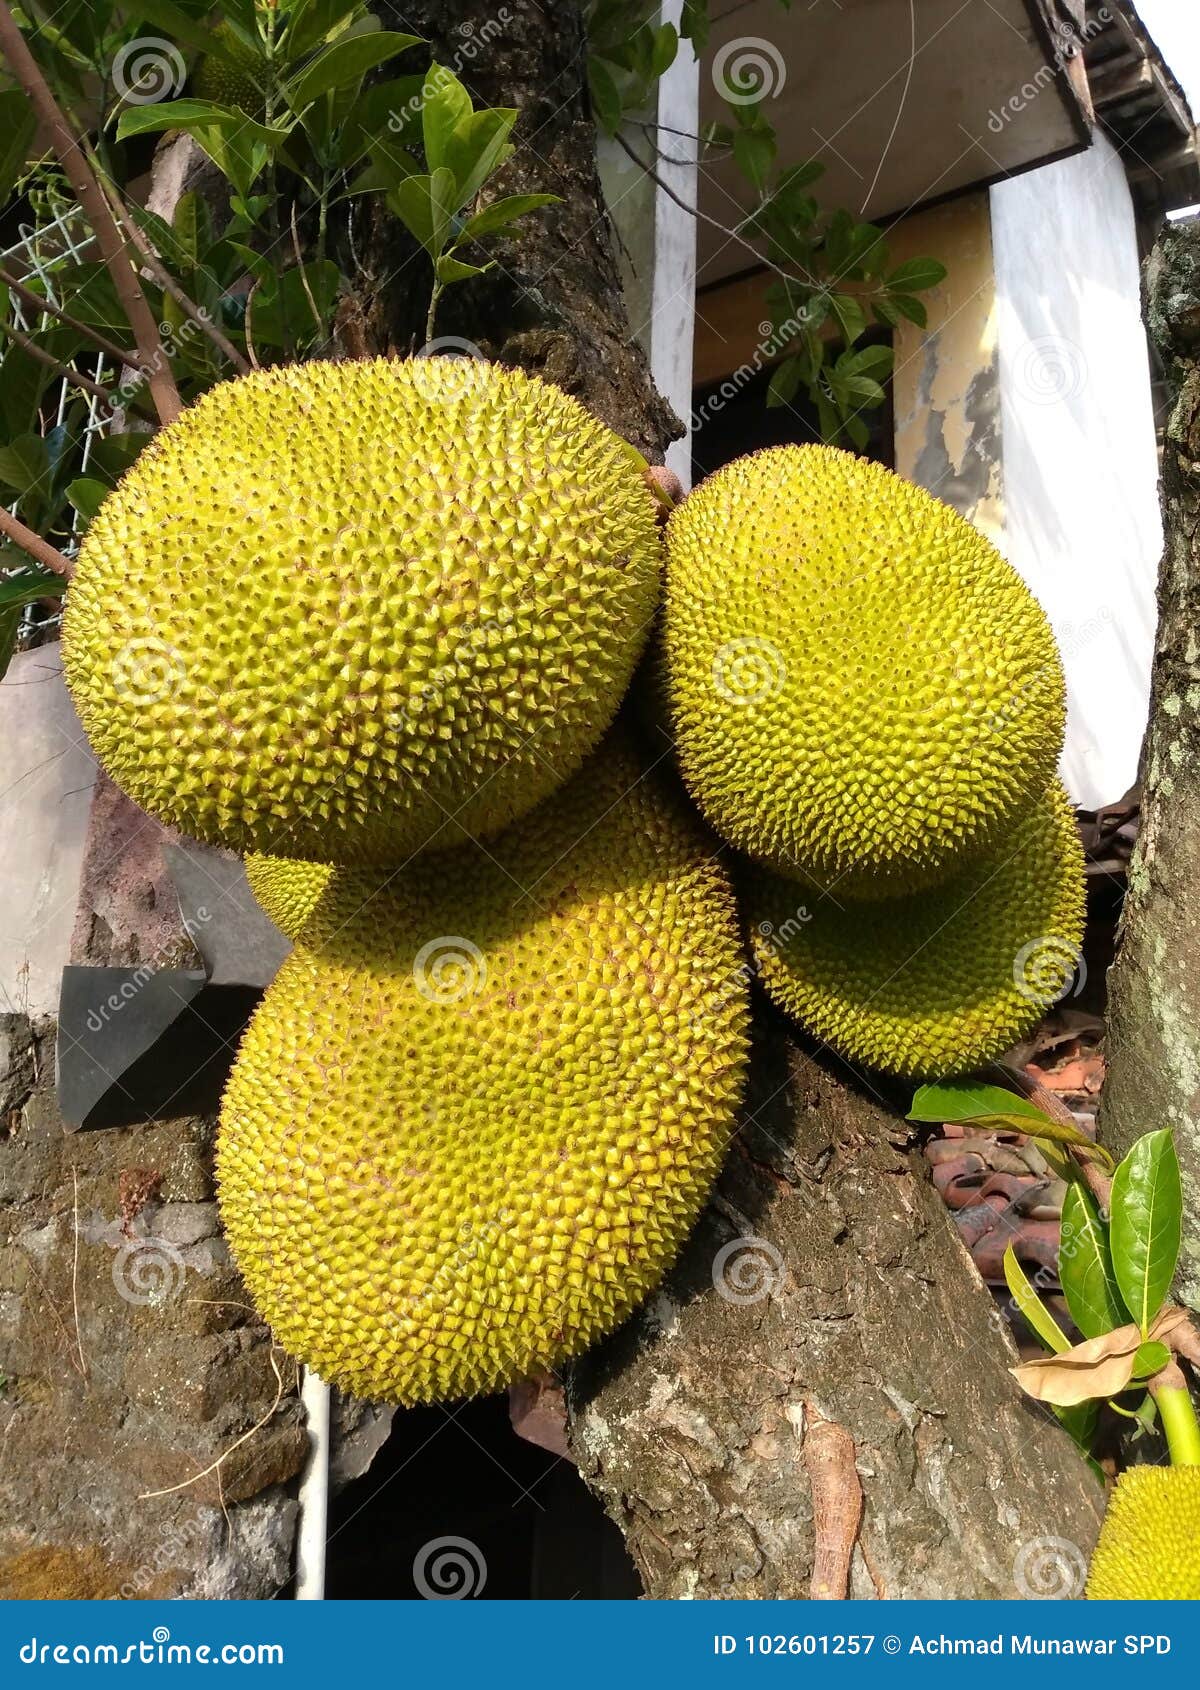 jackfruit that is still requested